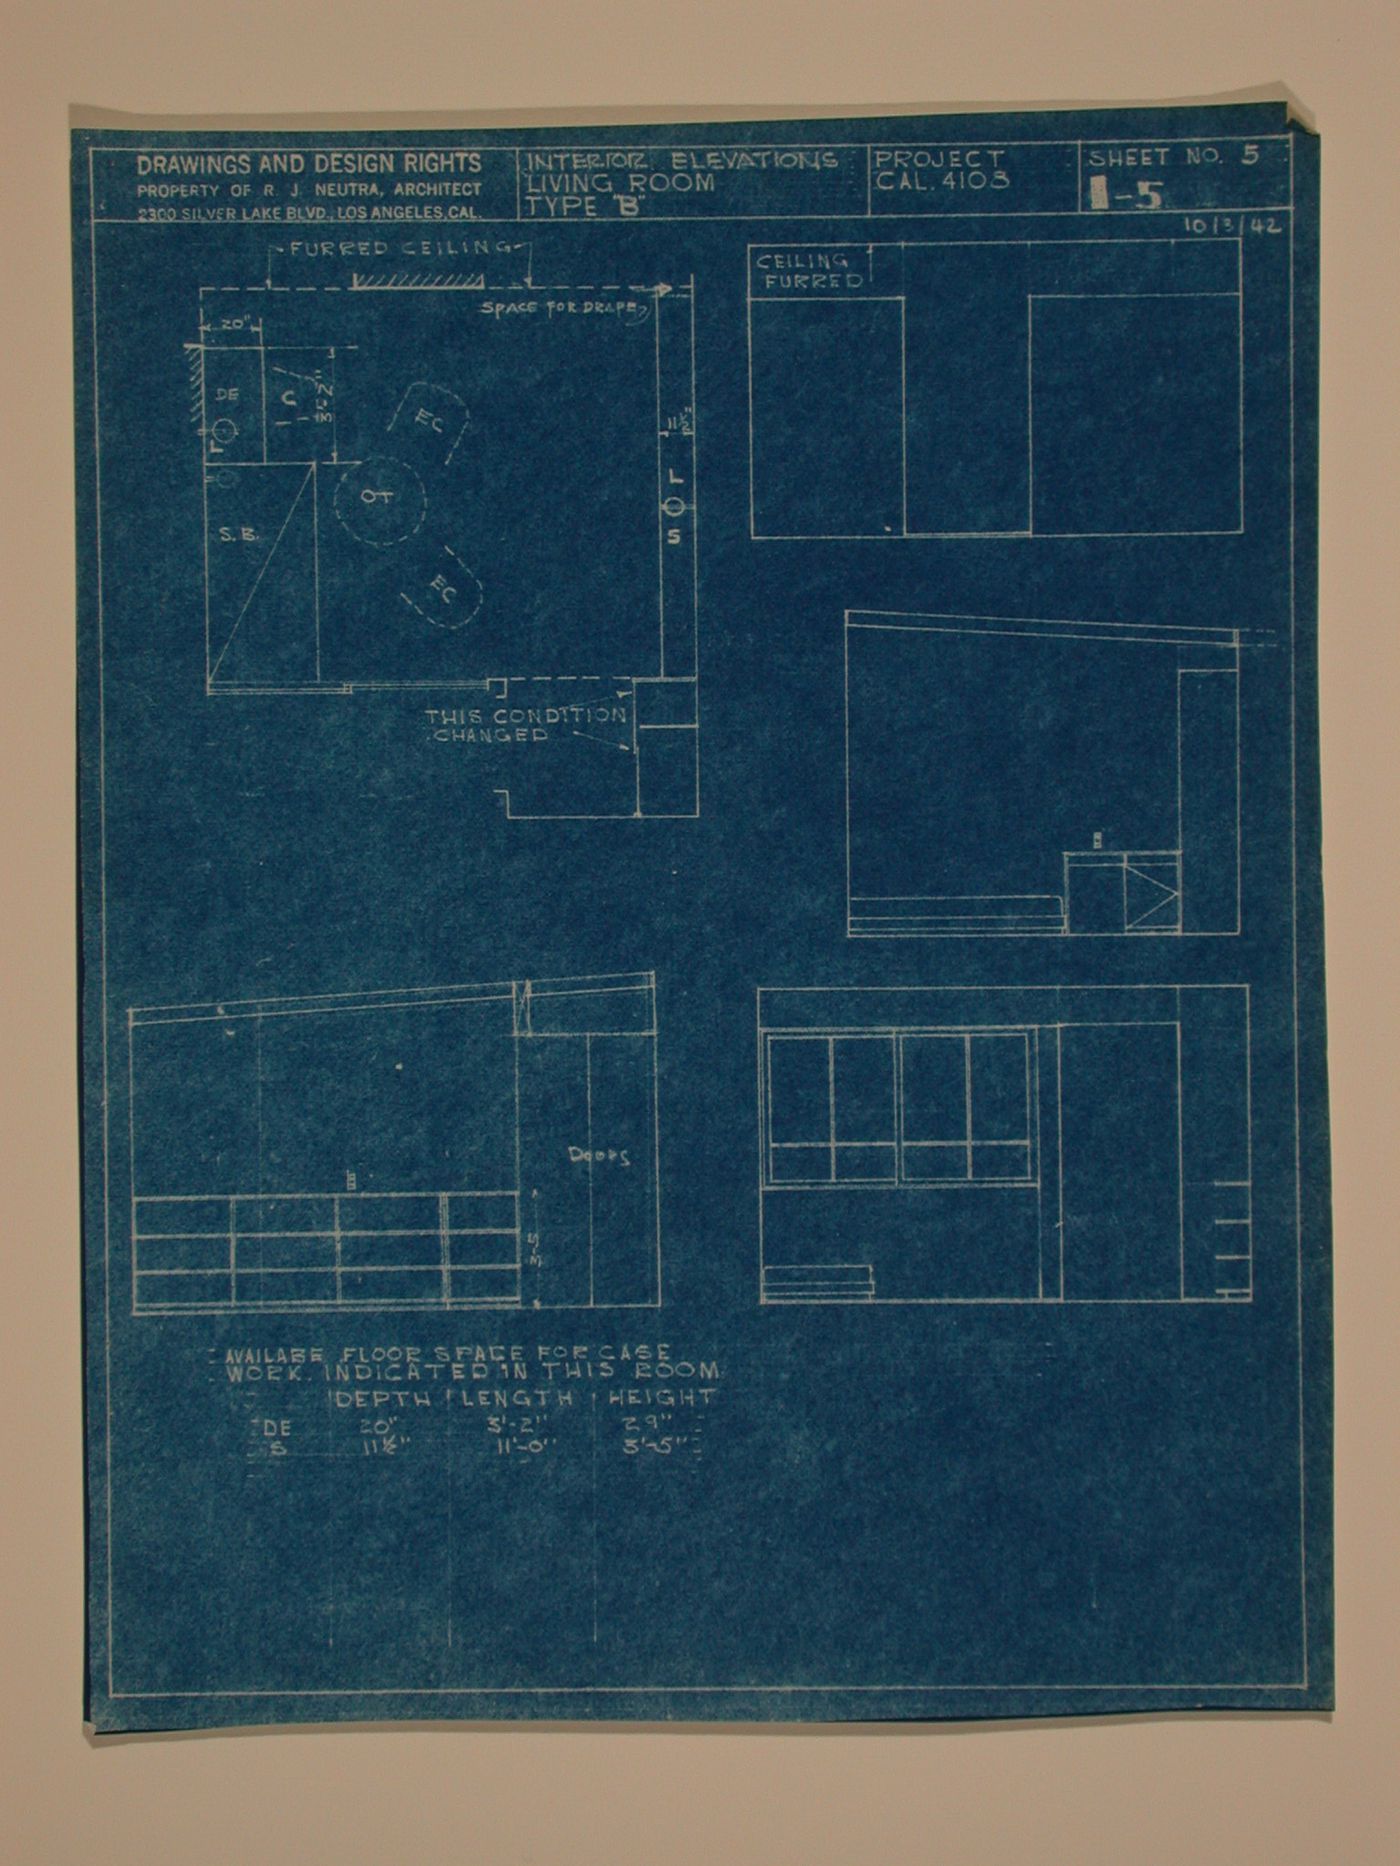 Interior elevations and plan for living room type "B"